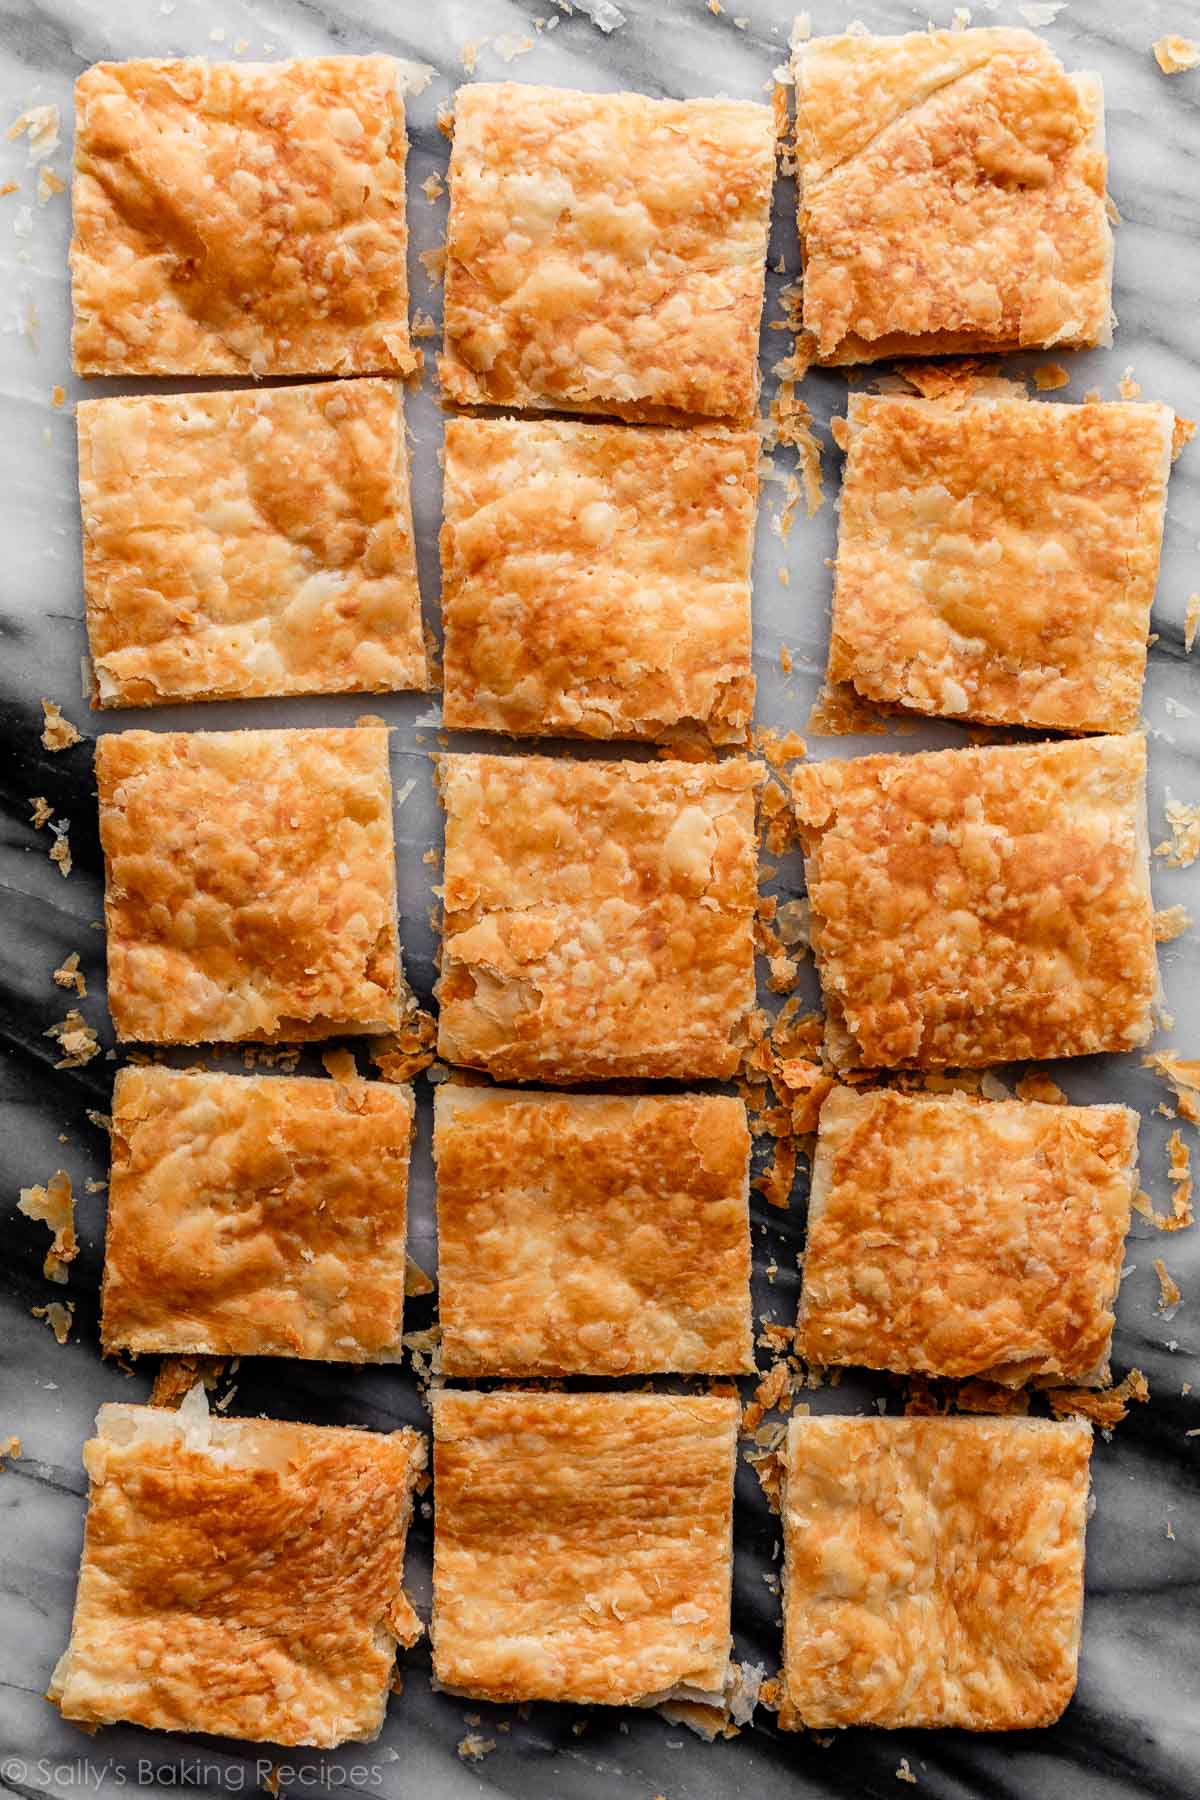 baked homemade puff pastry and then cut into squares.